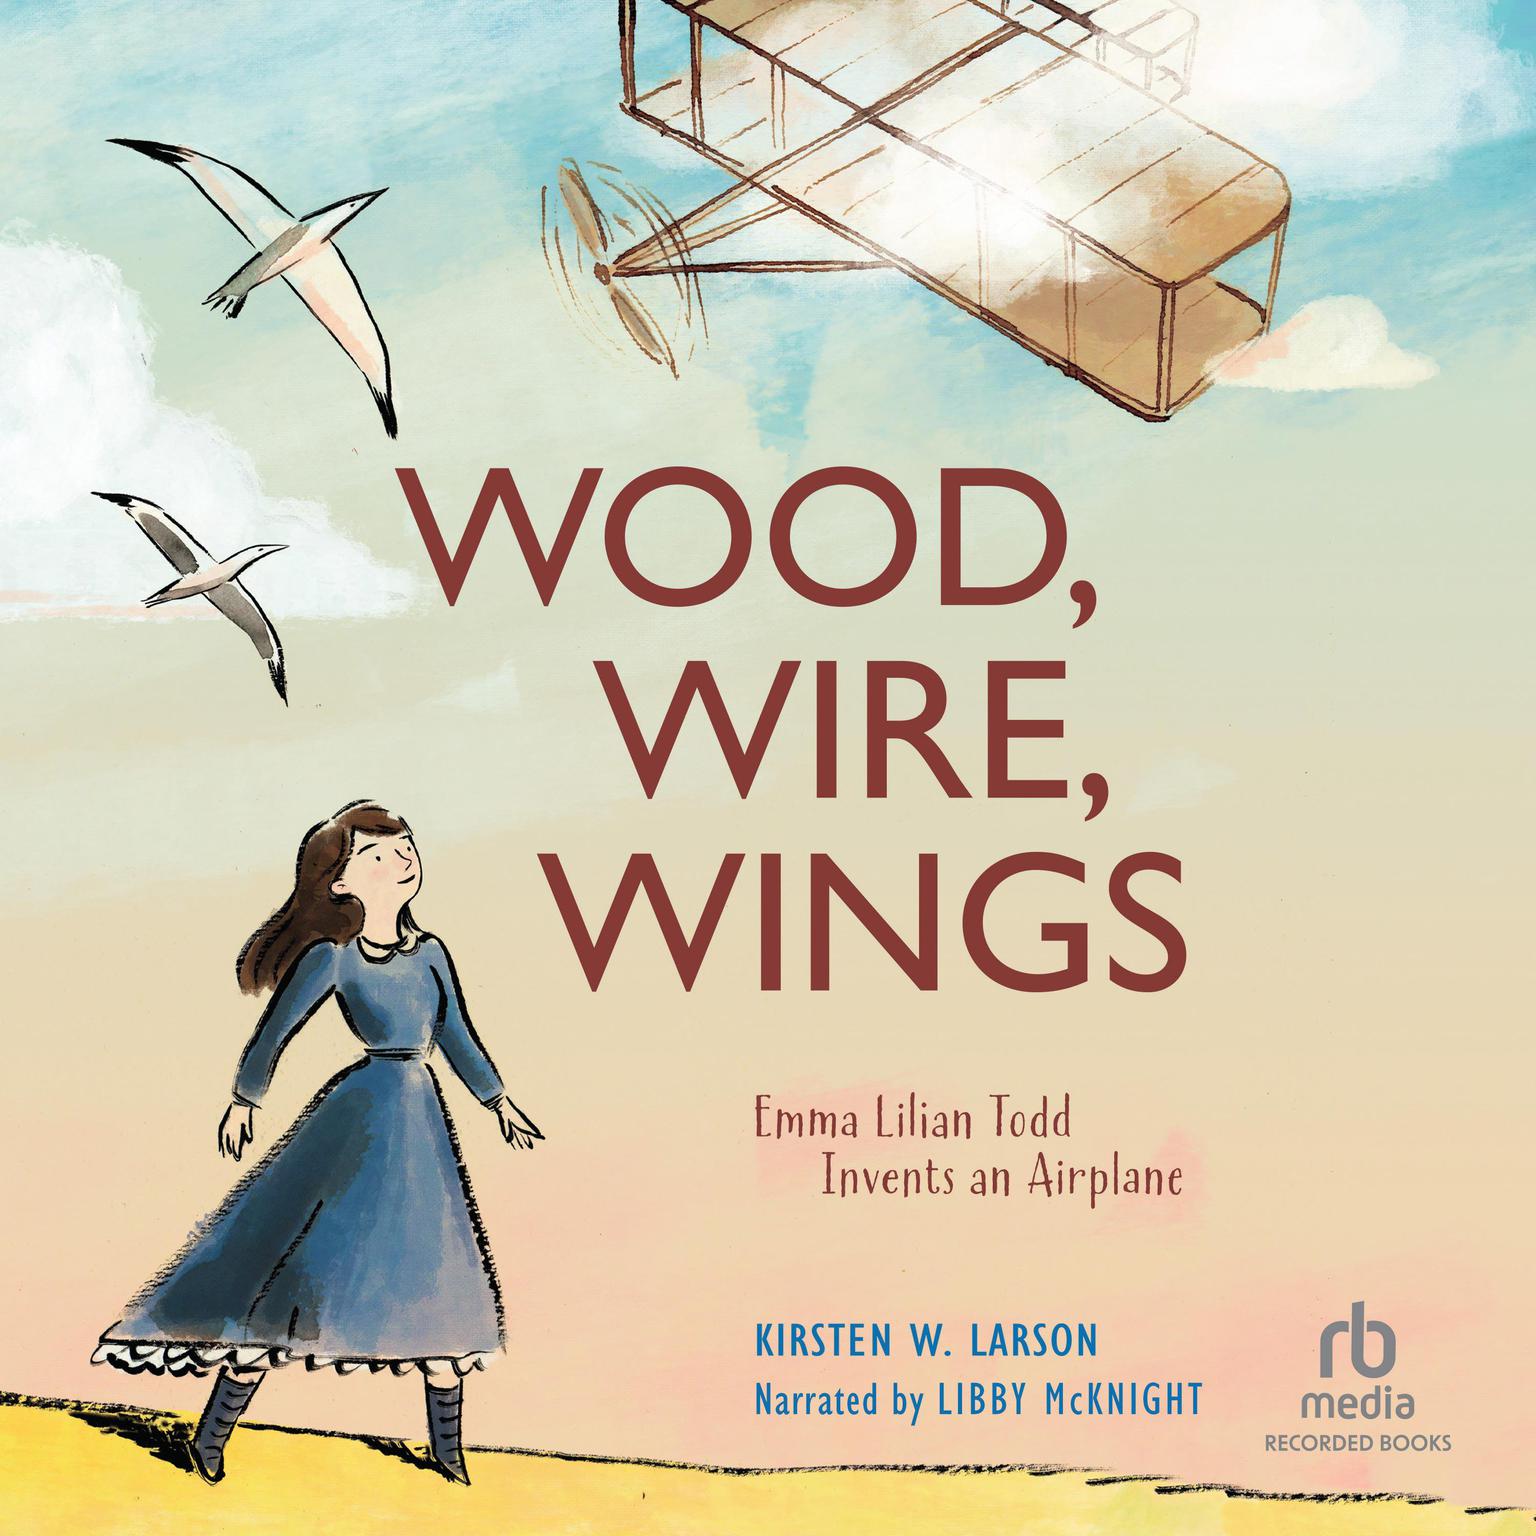 Wood, Wire, Wings: Emma Lilian Todd Invents an Airplane Audiobook, by Kirsten W. Larson